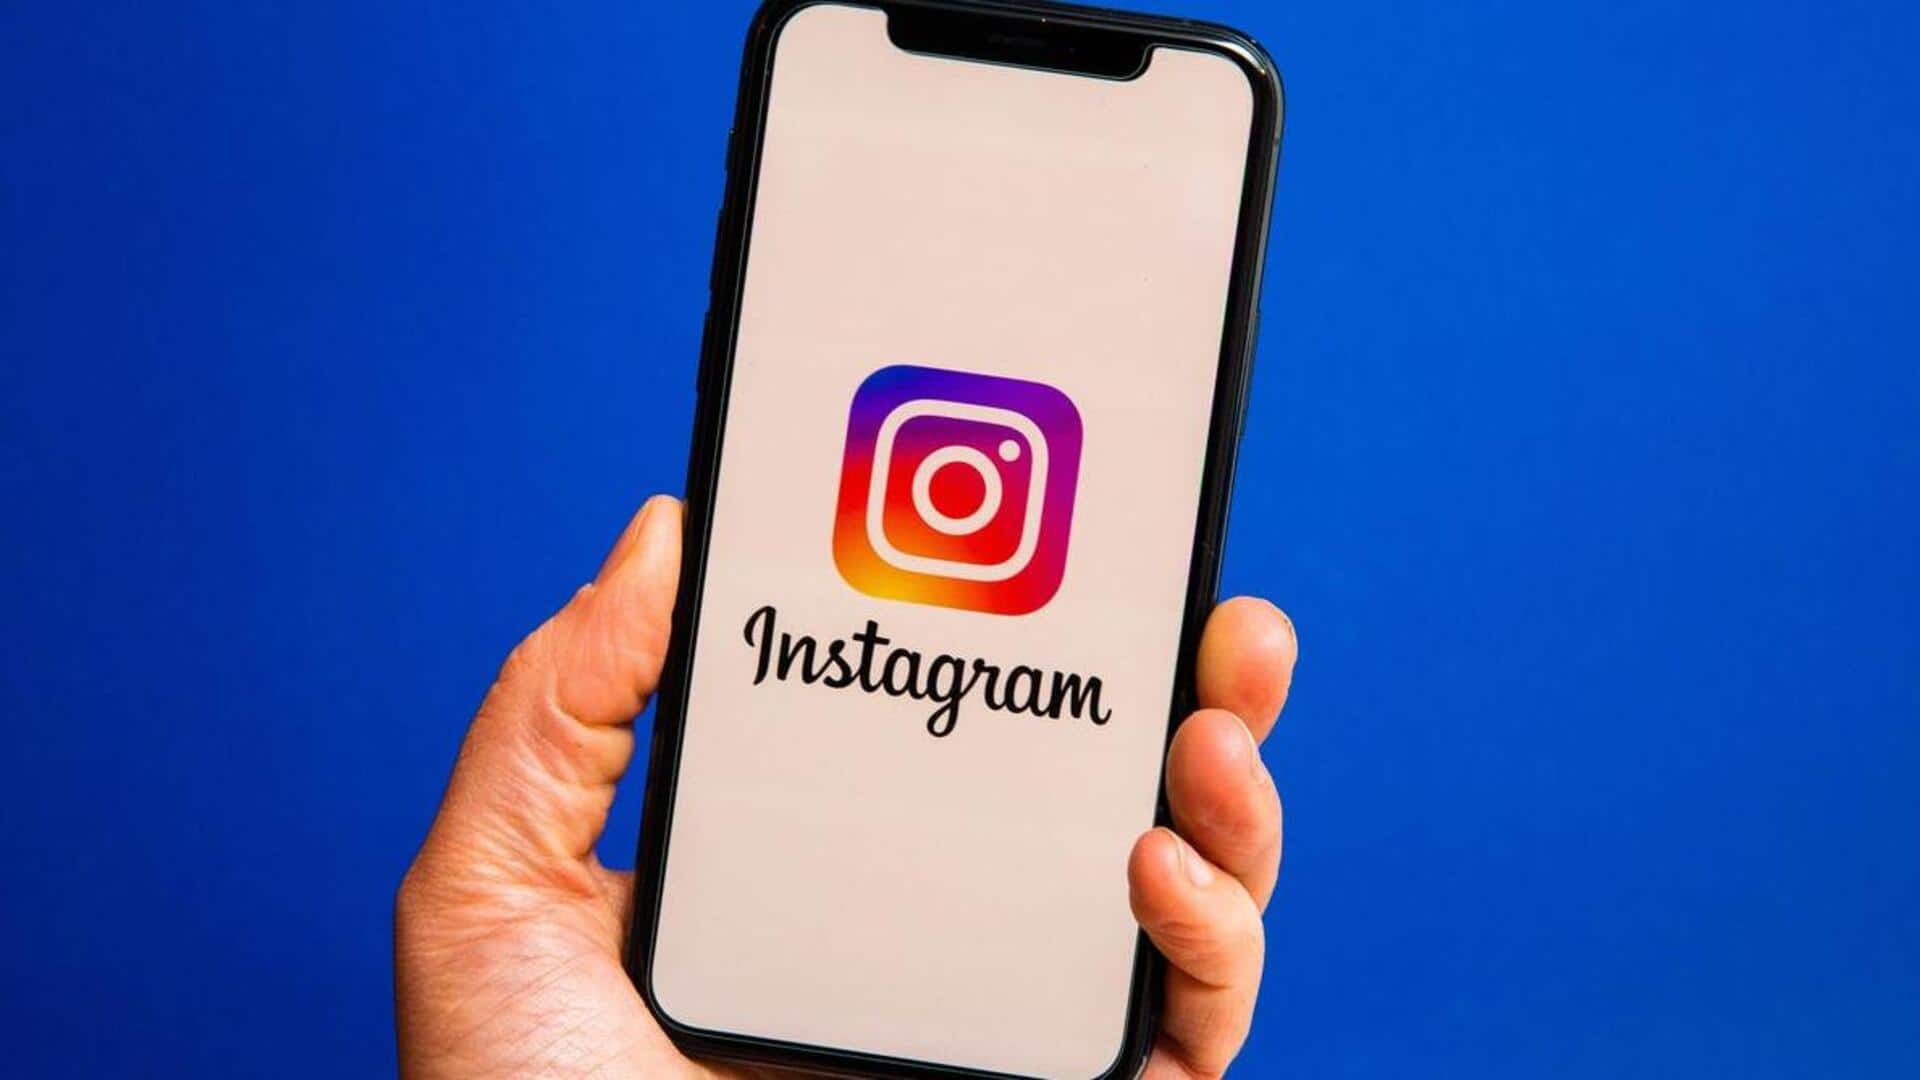 Meta to discontinue cross-messaging between Instagram and Facebook: Here's why